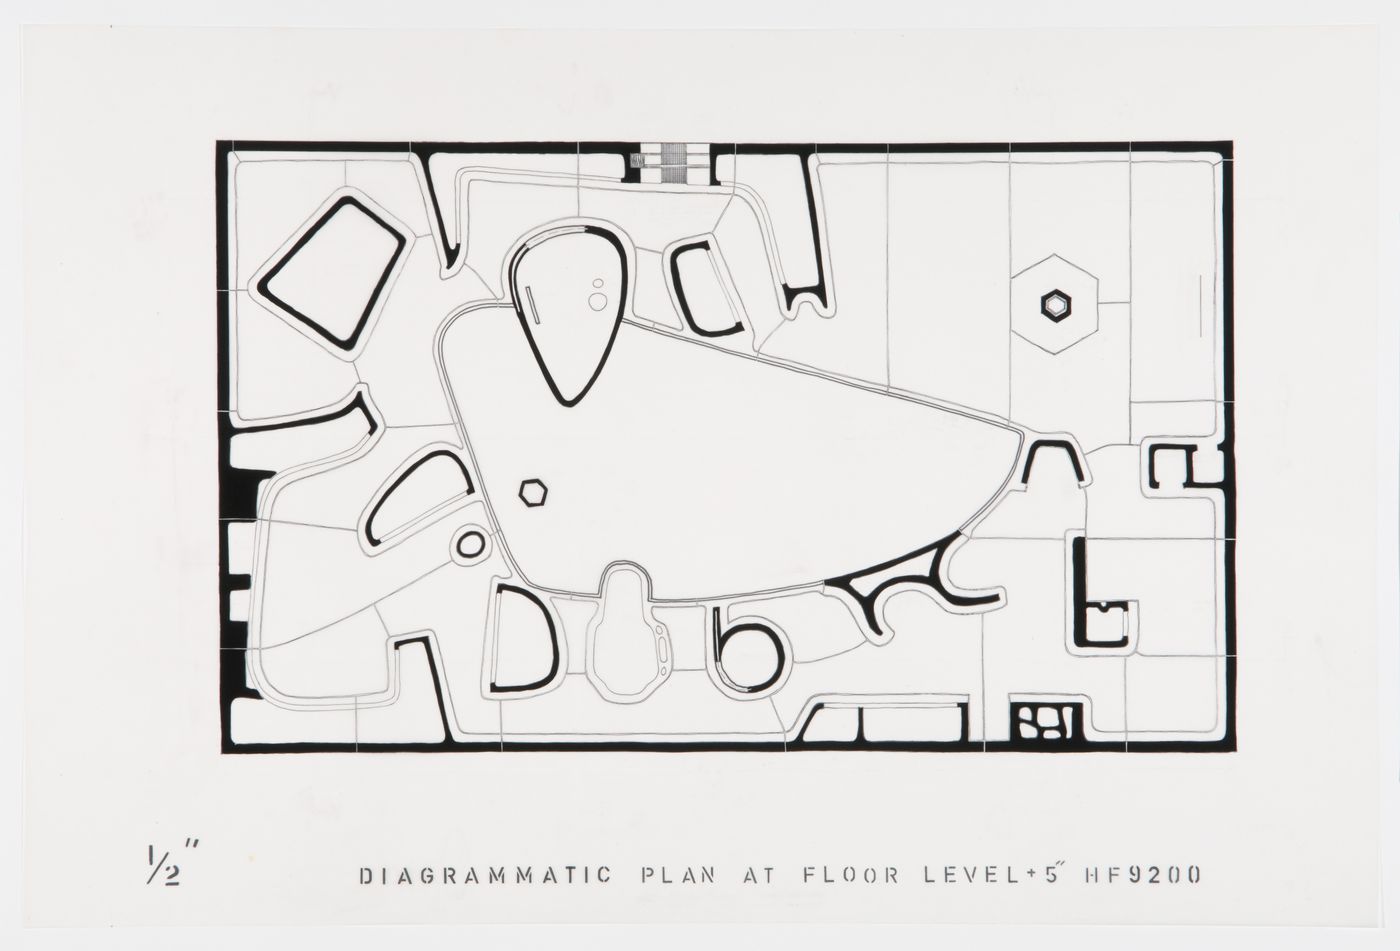 Plan for five inches above the floor level, House of the Future, Daily Mail Ideal Homes Exhibition, London, England